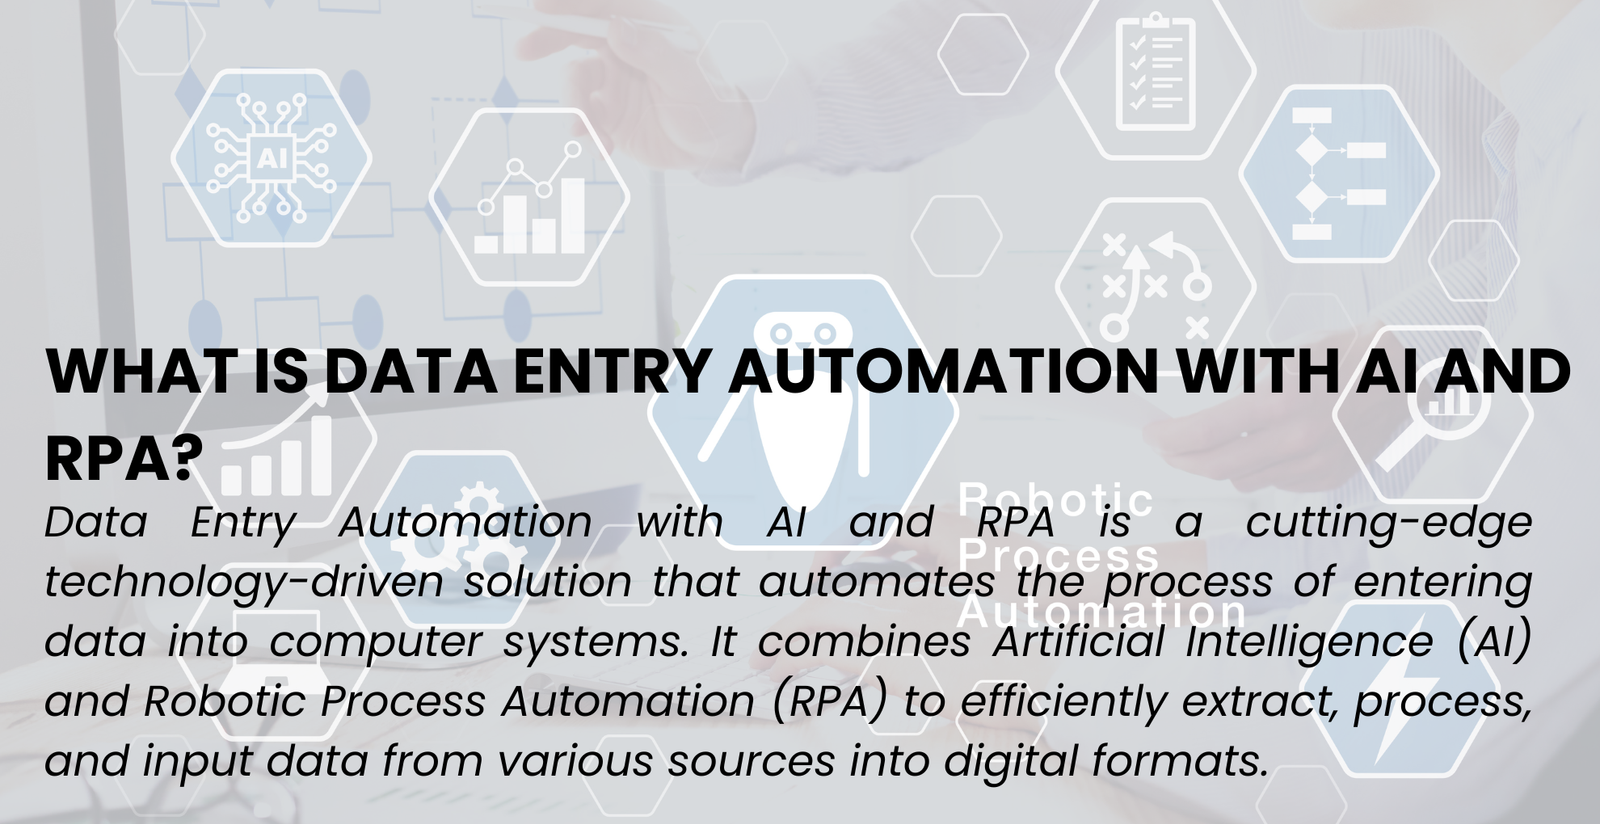 Data Entry Automation